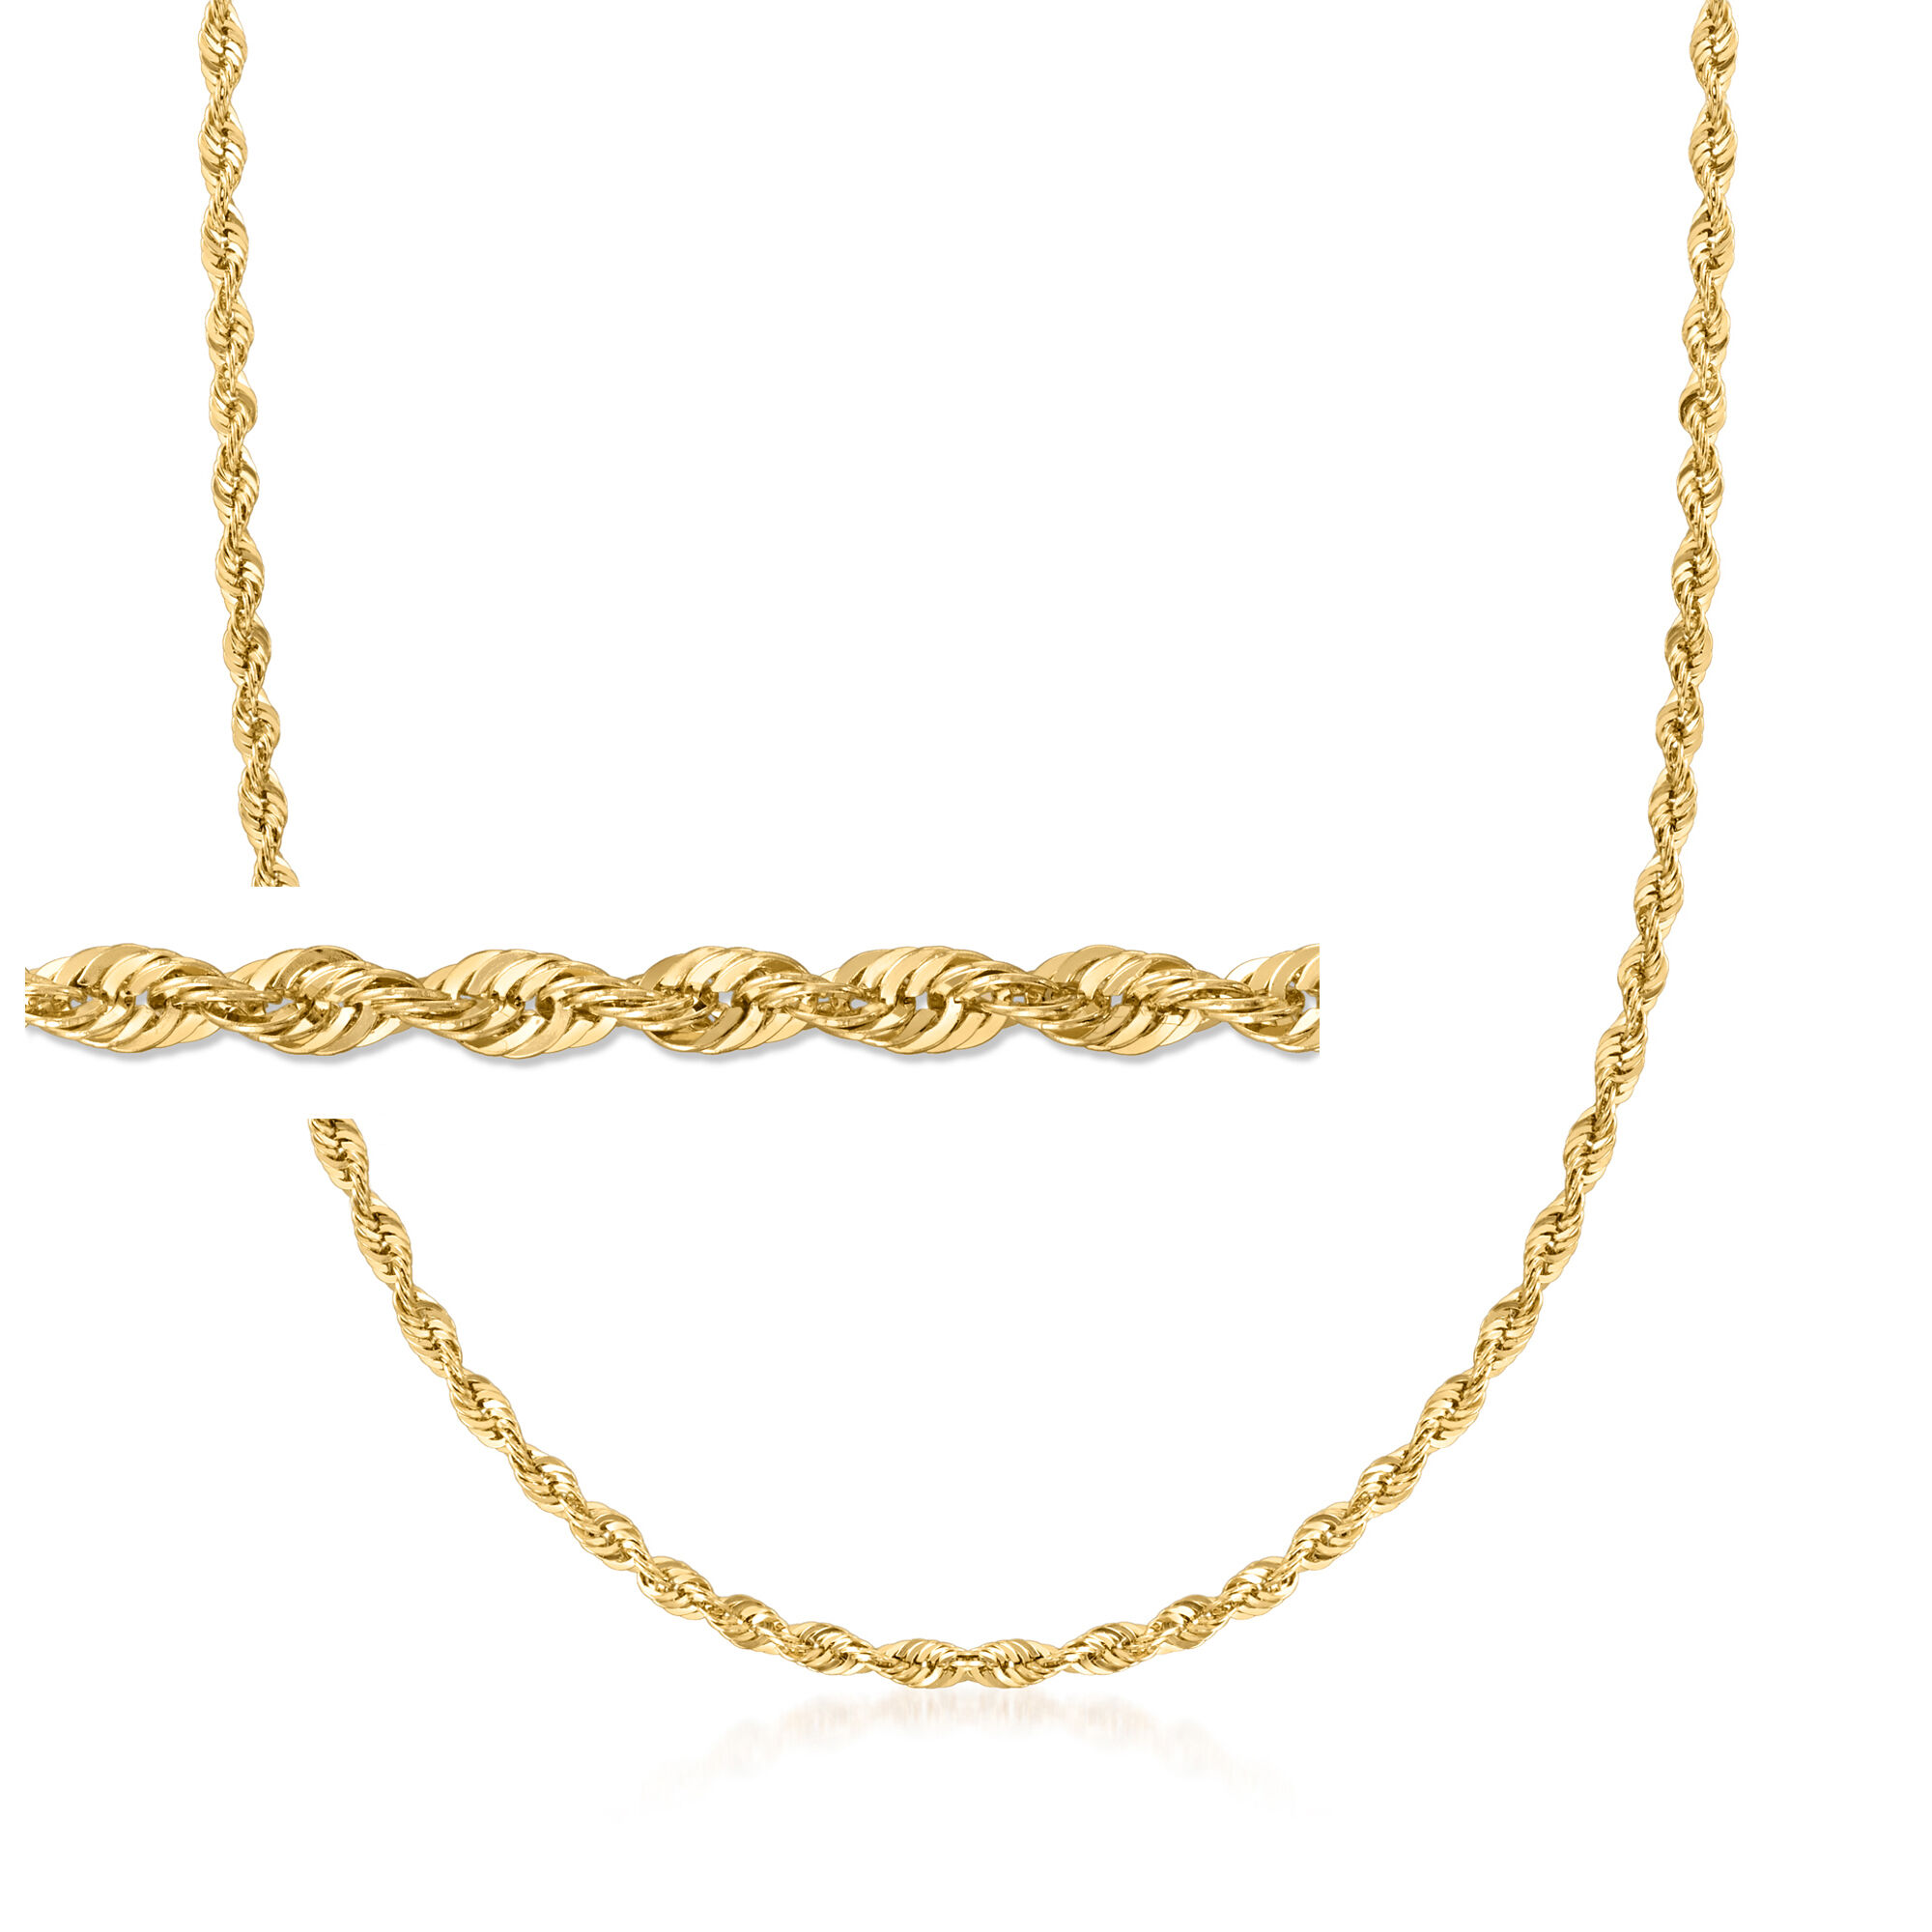 2.6mm 14kt Yellow Gold Rope Chain Necklace | Ross-Simons